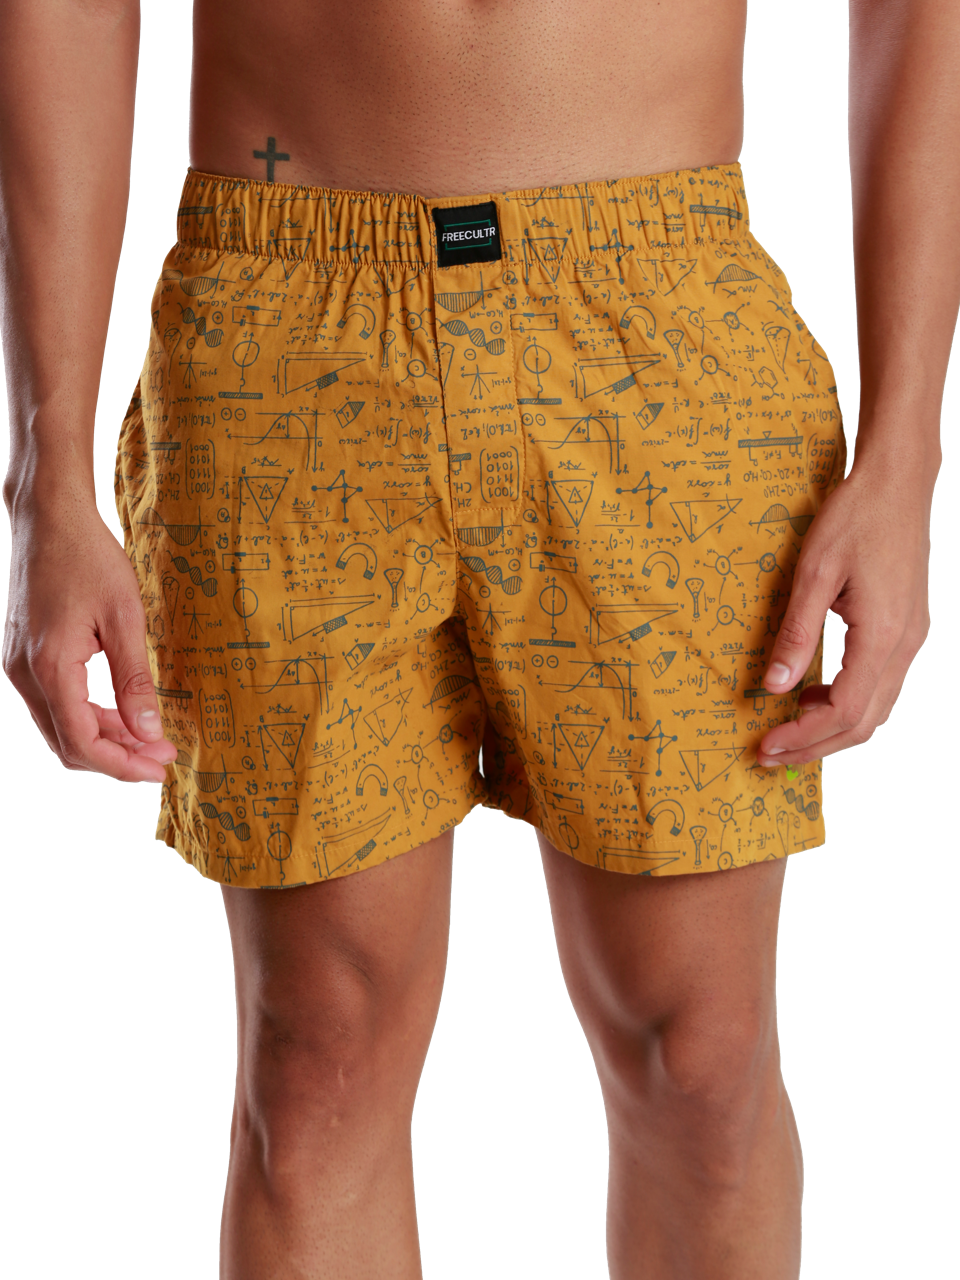 All-Day Printed Boxer Shorts For Men - (Pack of 3)